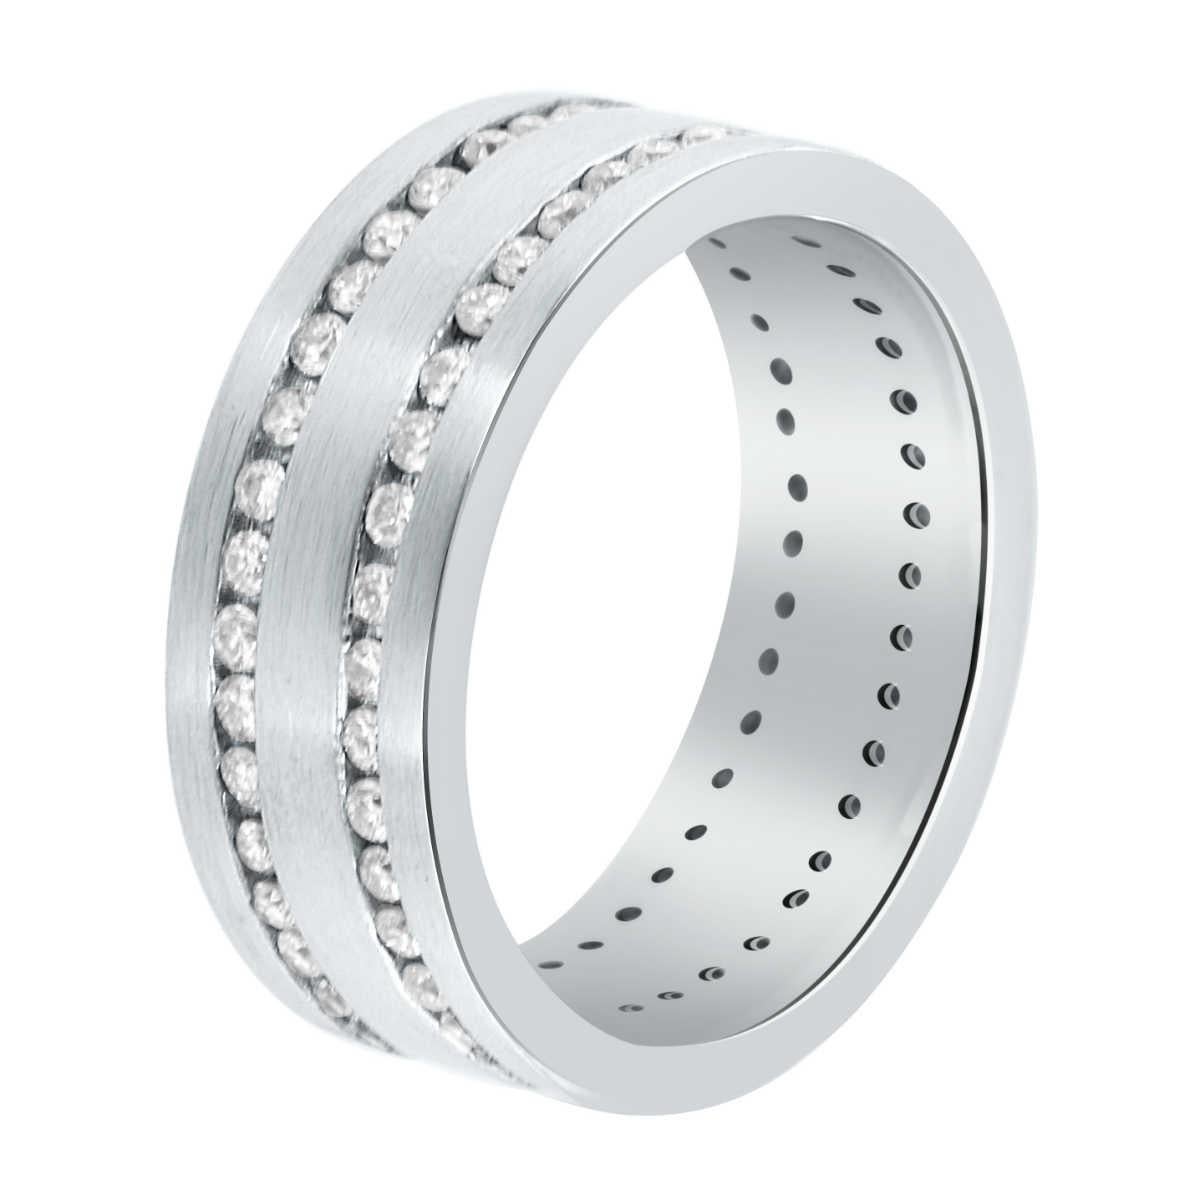 This 18k white gold handcrafted Unisex band showcases two (2) eternity rows of perfectly matched Round Brilliant diamonds on an eight (8) MM wide band. The band has a satin finish and comfort fit.

Diamond Weight : 1.17 Carats
Diamond Color: